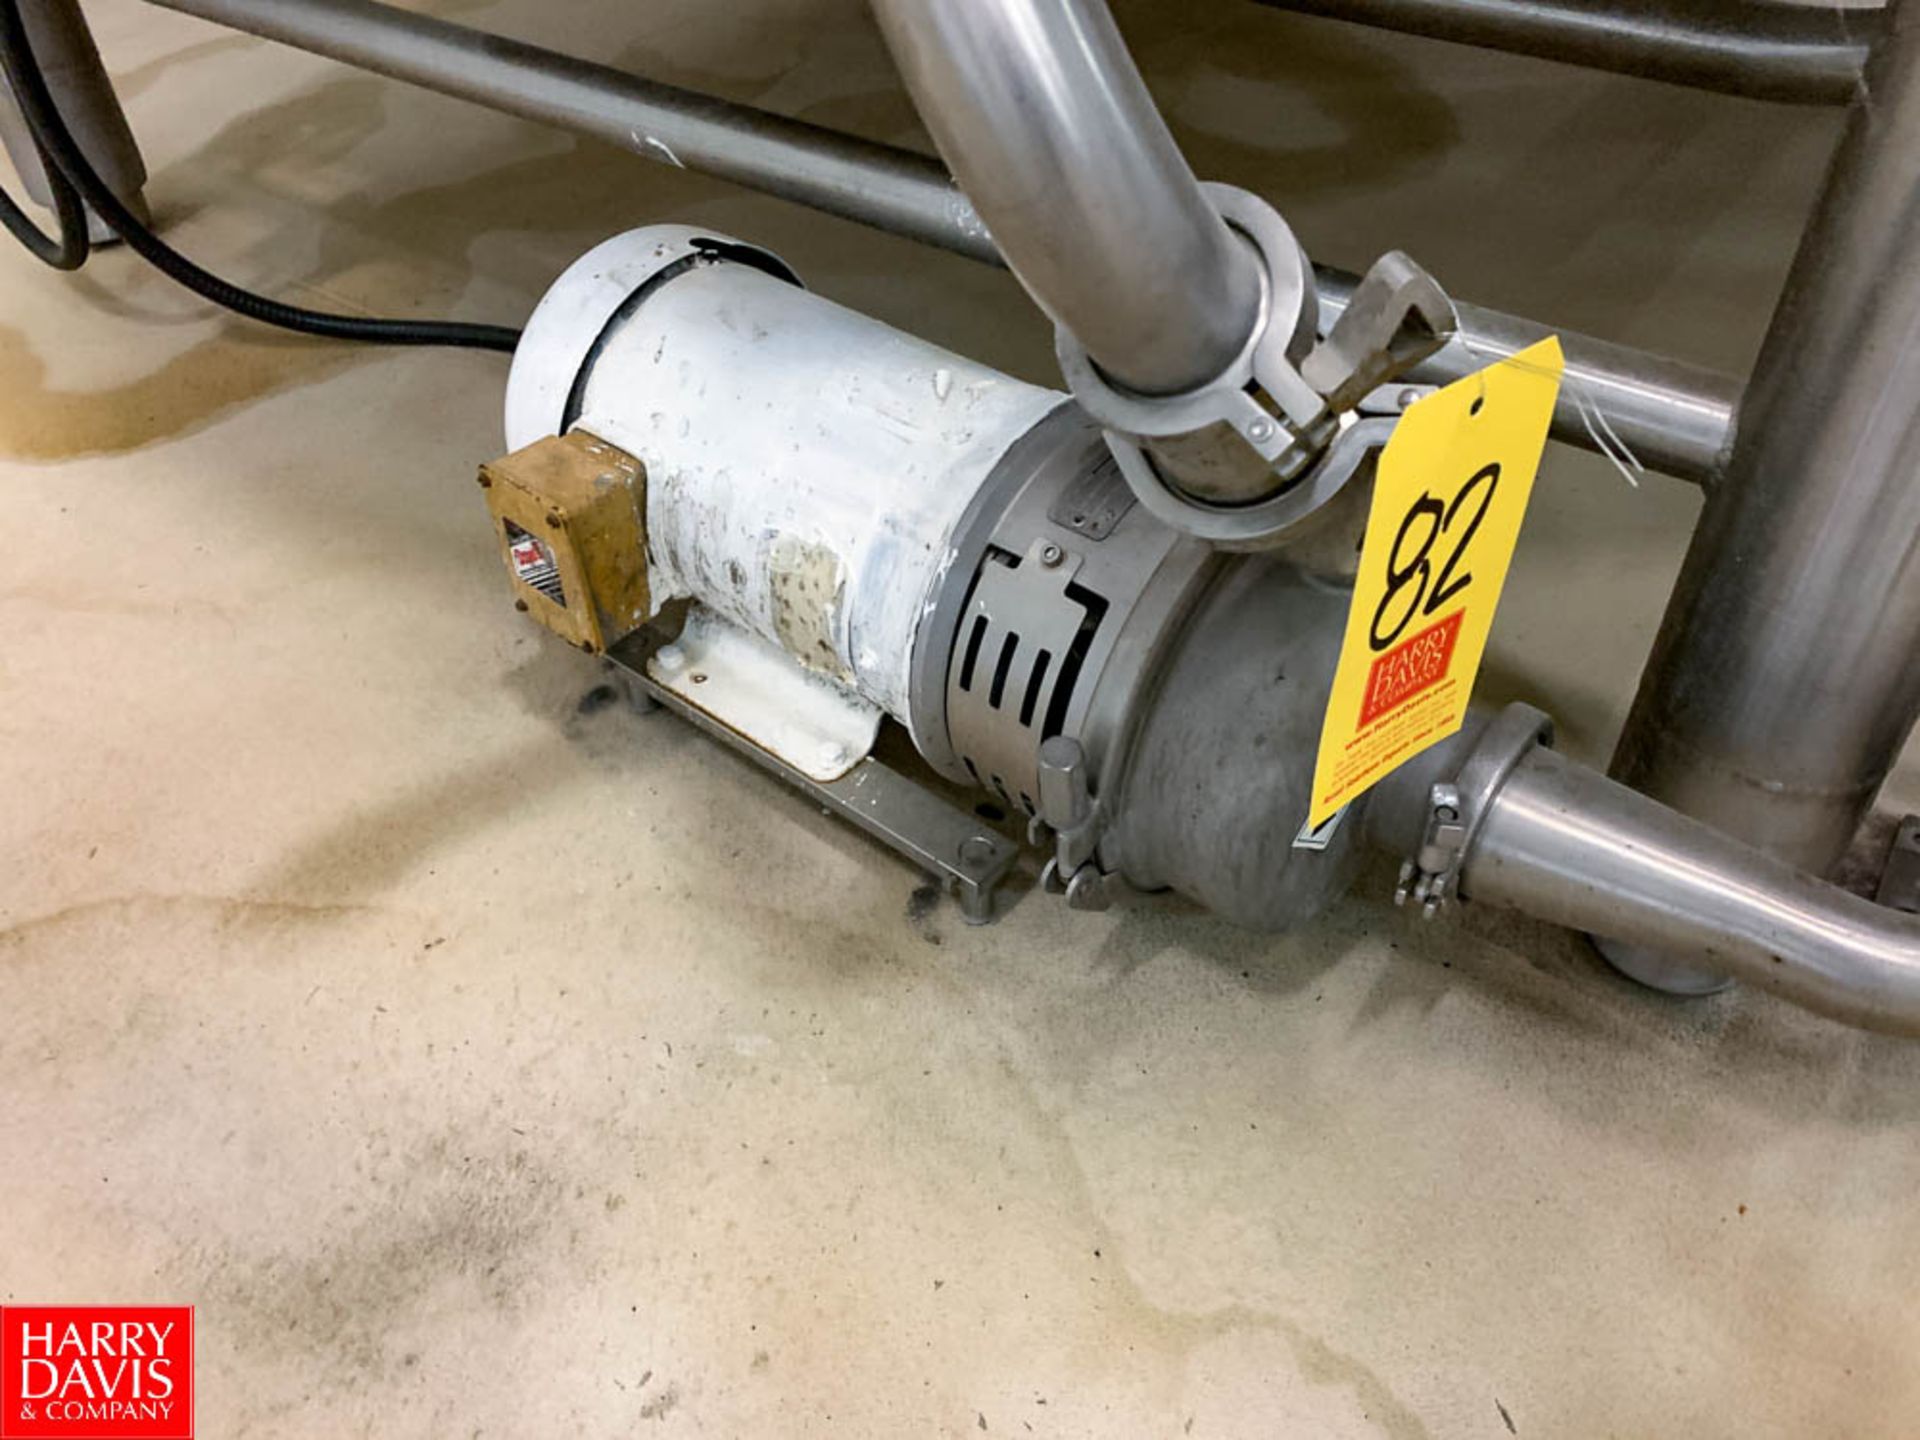 SPX Centrifugal Pump Model: 35/55, 3" x 2.5" Clamp Type Rigging Fee: $ 200